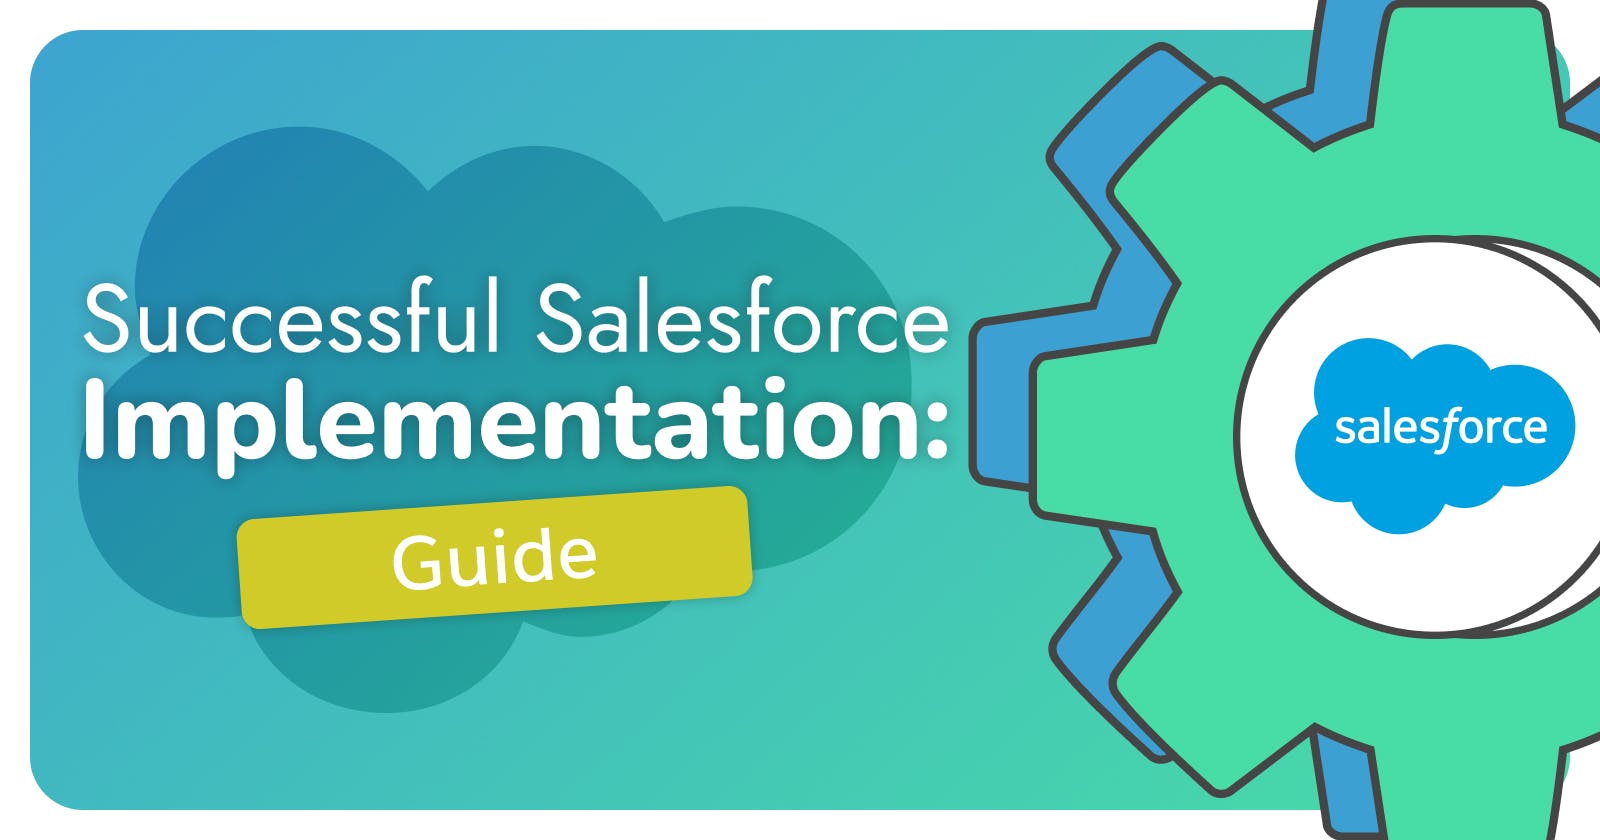 Successful Salesforce Implementation: Guide